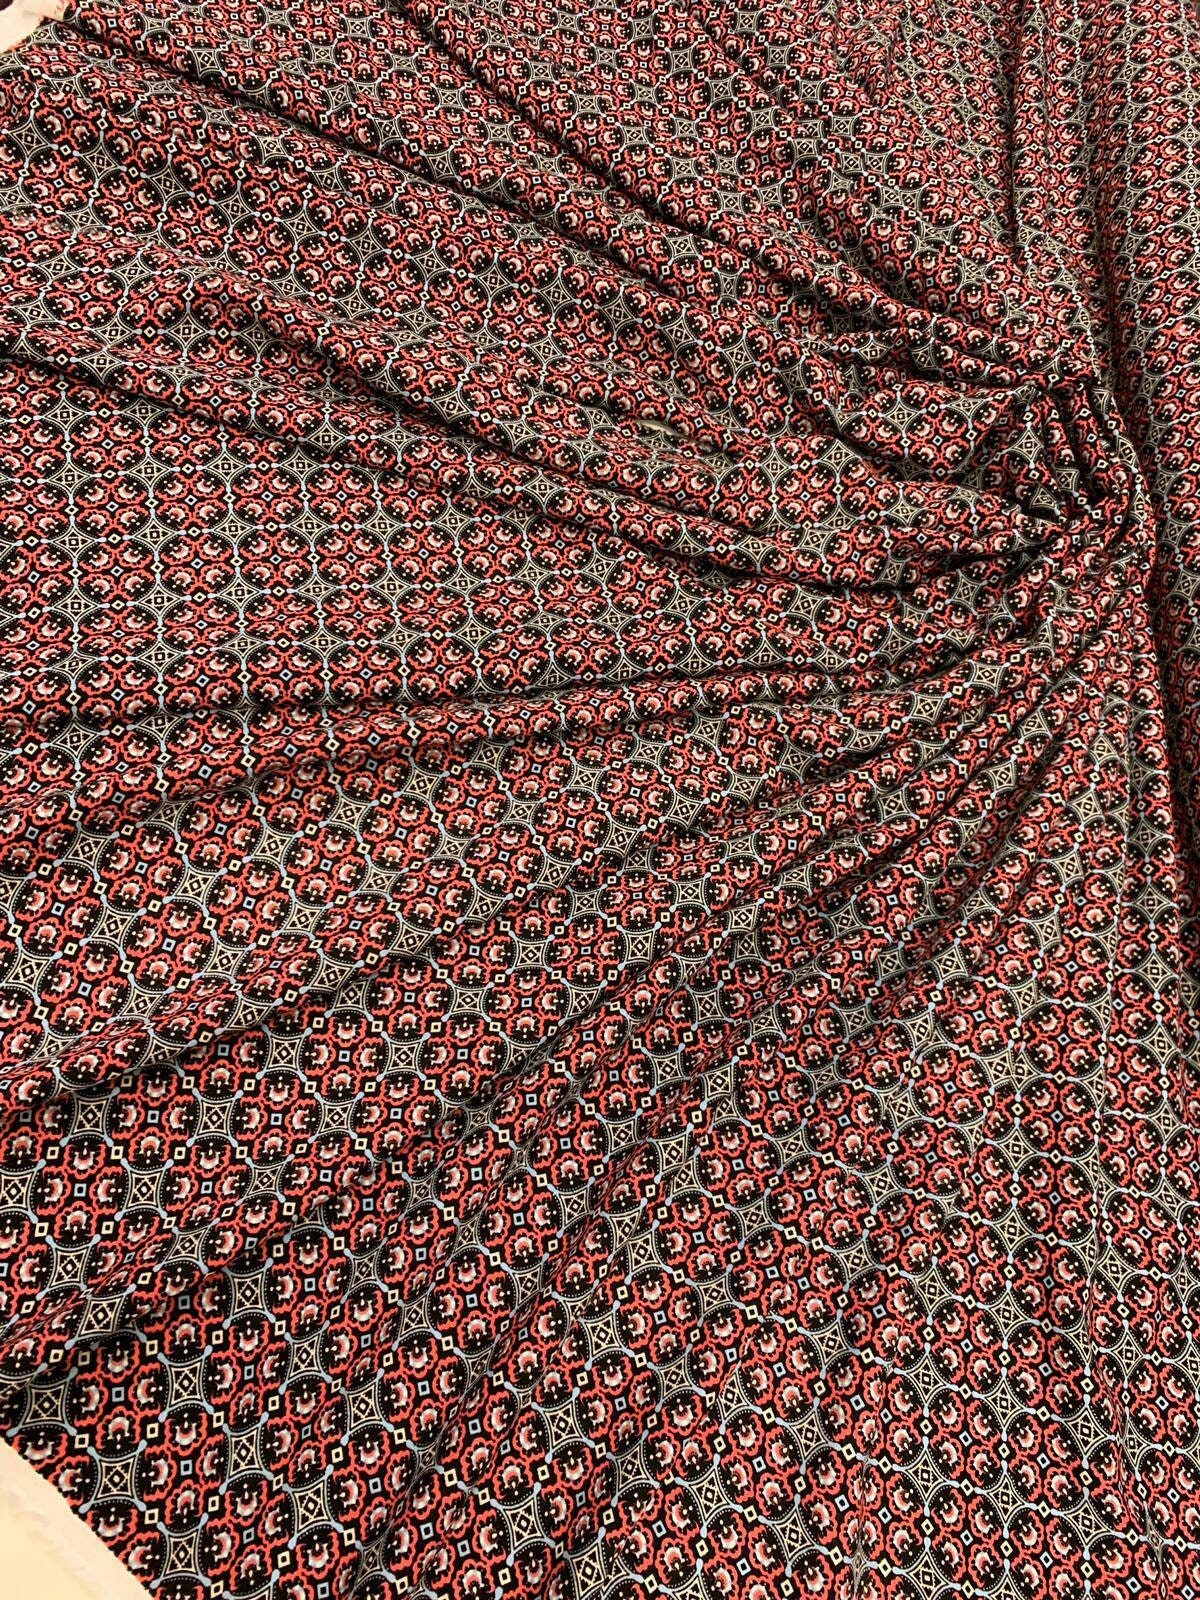 Rayon Challis Asian Inspired Print Fabric by the Yard 58 Inches Wide red black geometric  soft flowy organic kids dress draping clothing